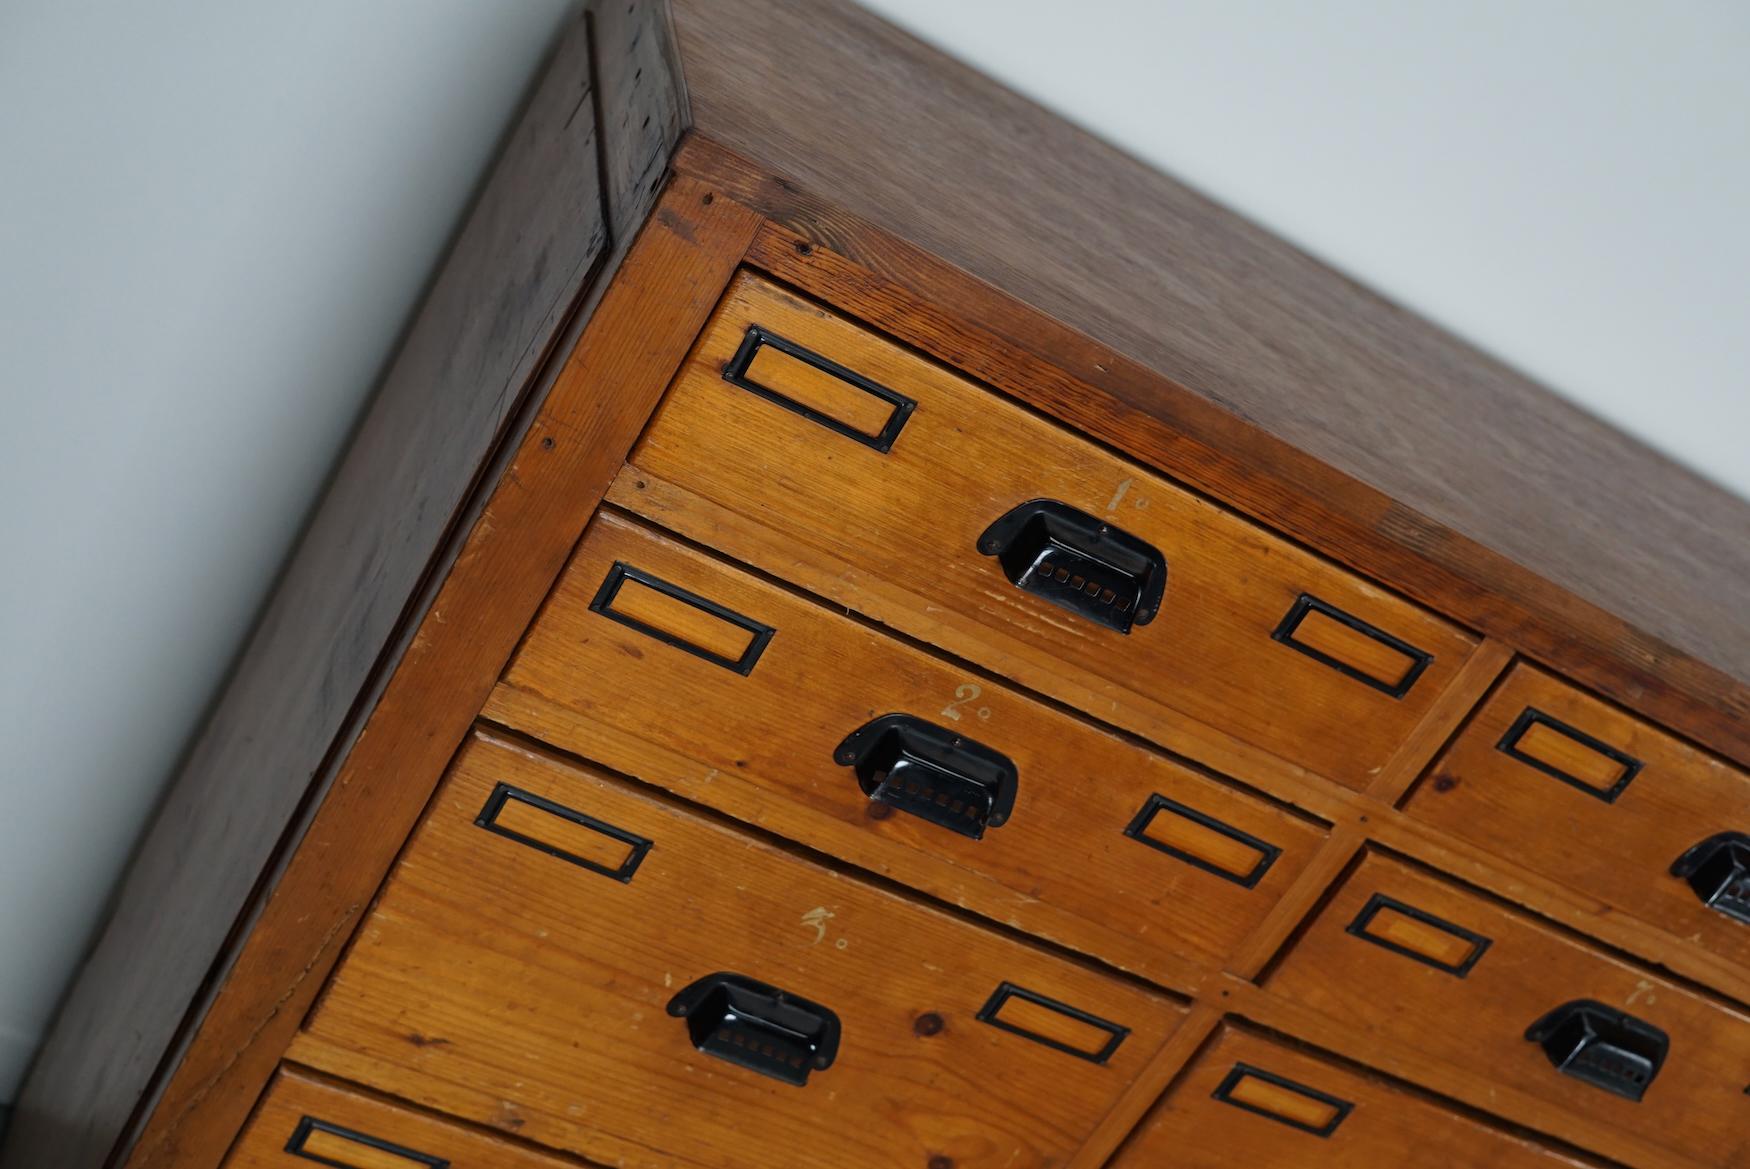 This workshop cabinet was made from pine in the Netherlands circa 1930s and it was used in a workshop for dentist equipment. It features many drawers with nice handles and name card holders. The interior dimensions of the drawers are: DWH 35 x 37 x